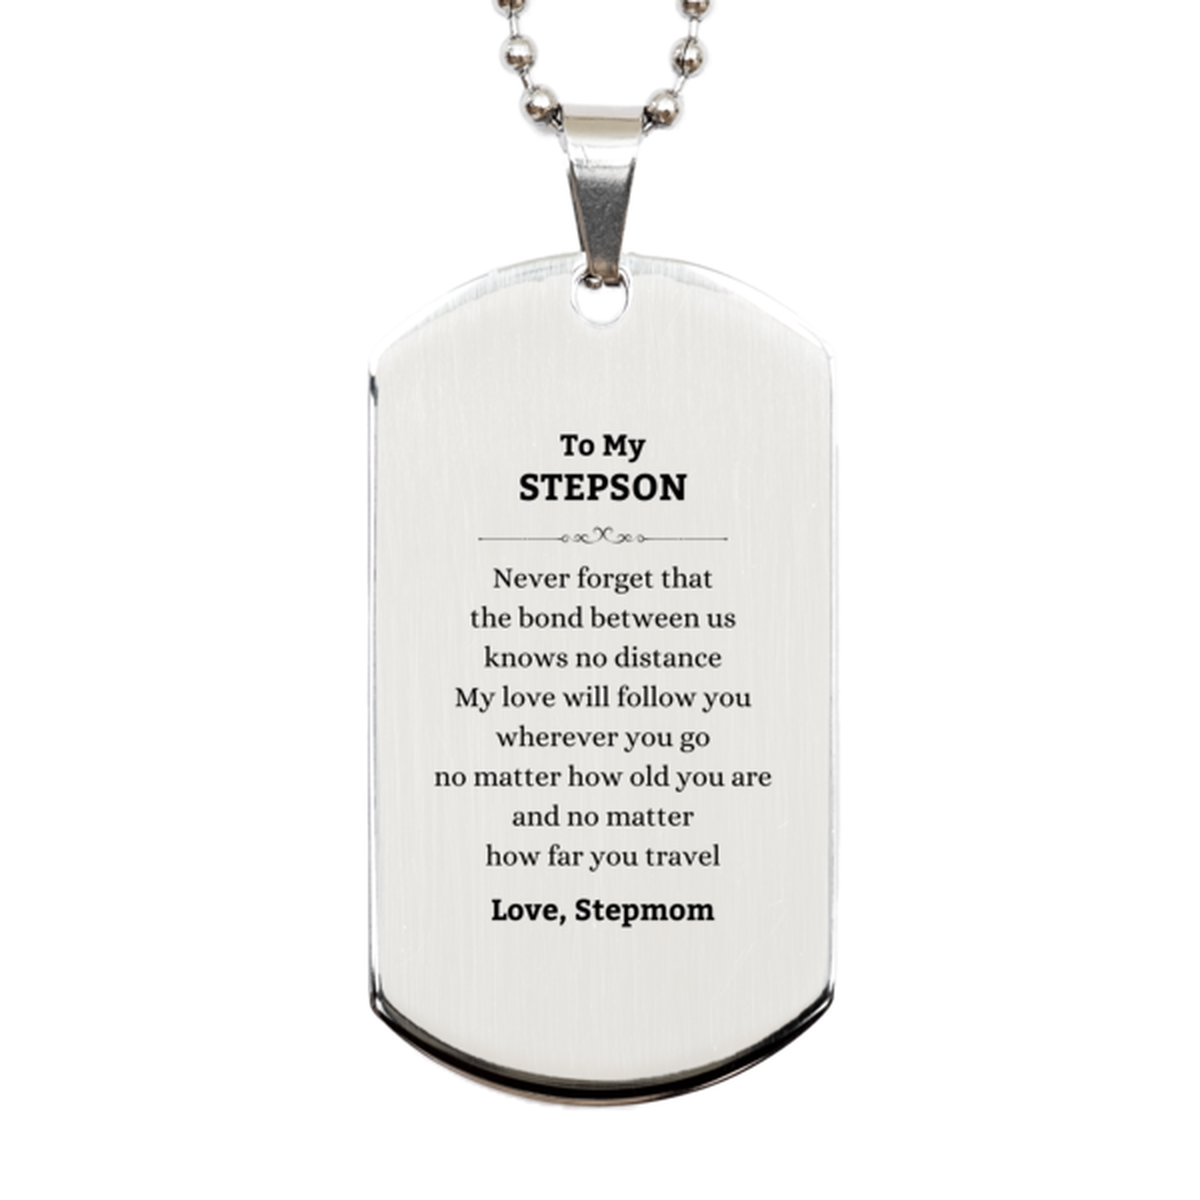 Stepson Birthday Gifts from Stepmom, Adjustable Silver Dog Tag for Stepson Christmas Graduation Unique Gifts Stepson Never forget that the bond between us knows no distance. Love, Stepmom